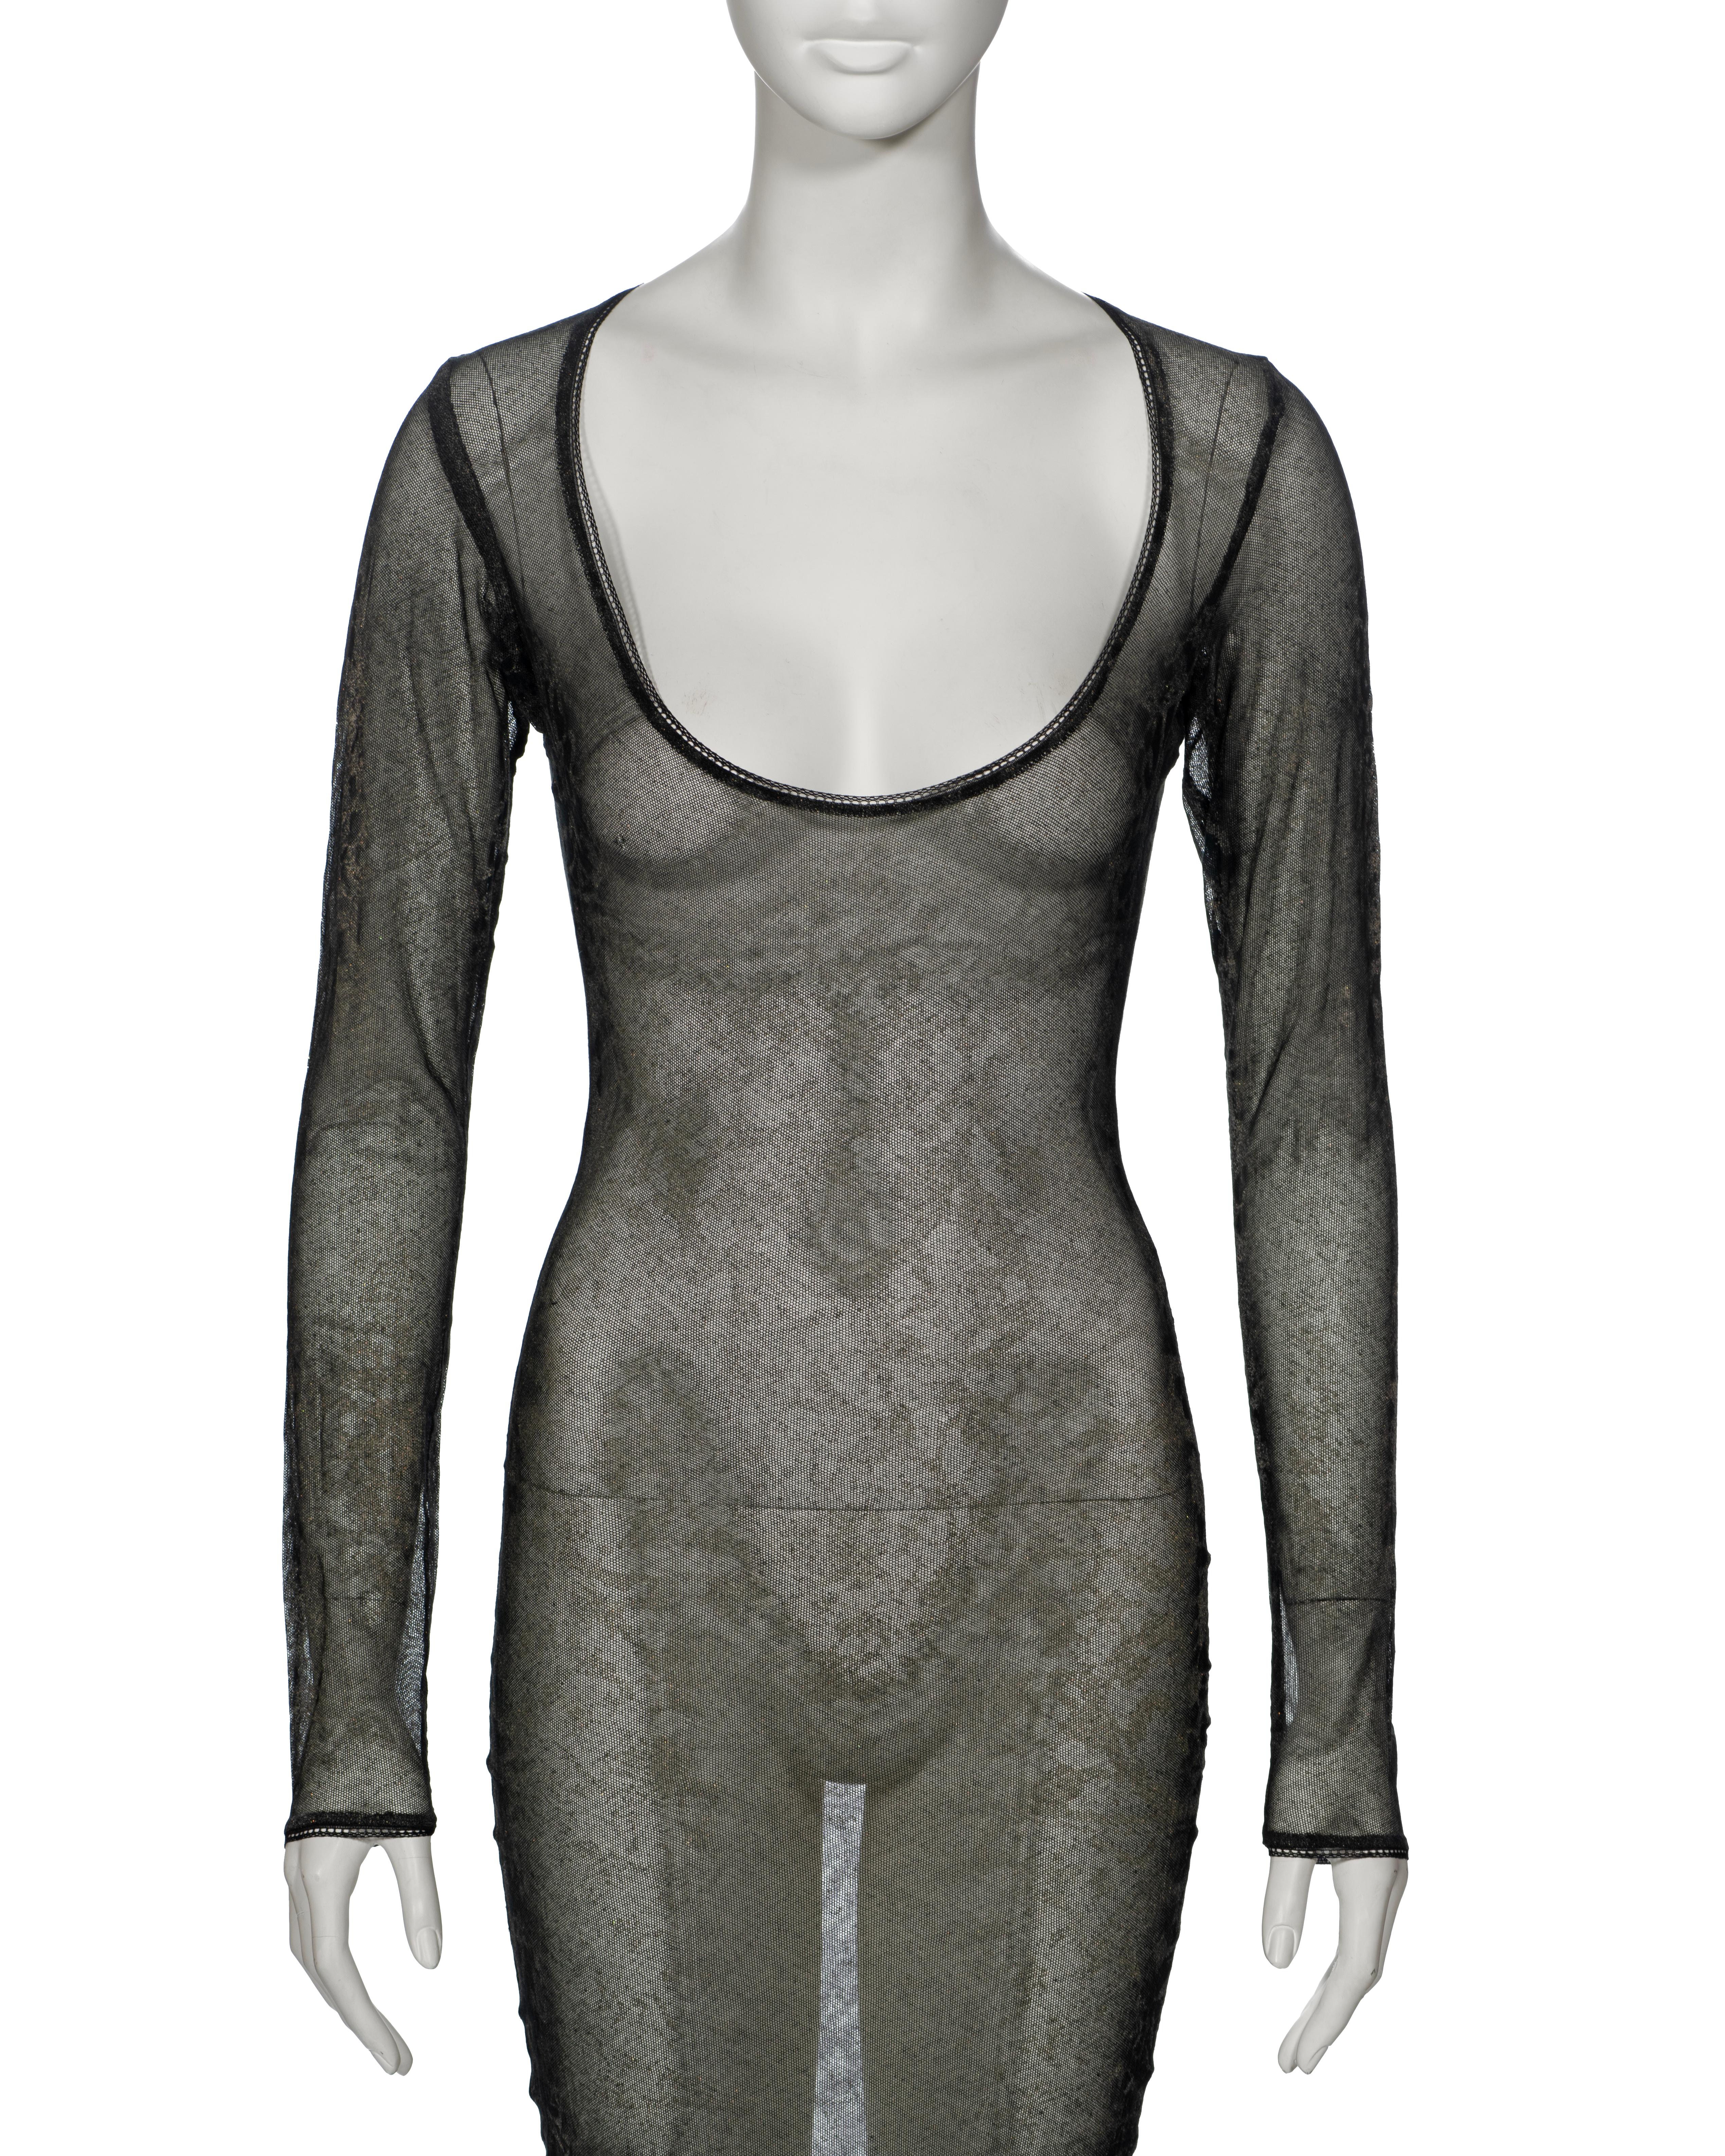 Vivienne Westwood Glitter Printed Sheer Cotton Mesh Evening Dress, fw 1992 In Fair Condition For Sale In London, GB